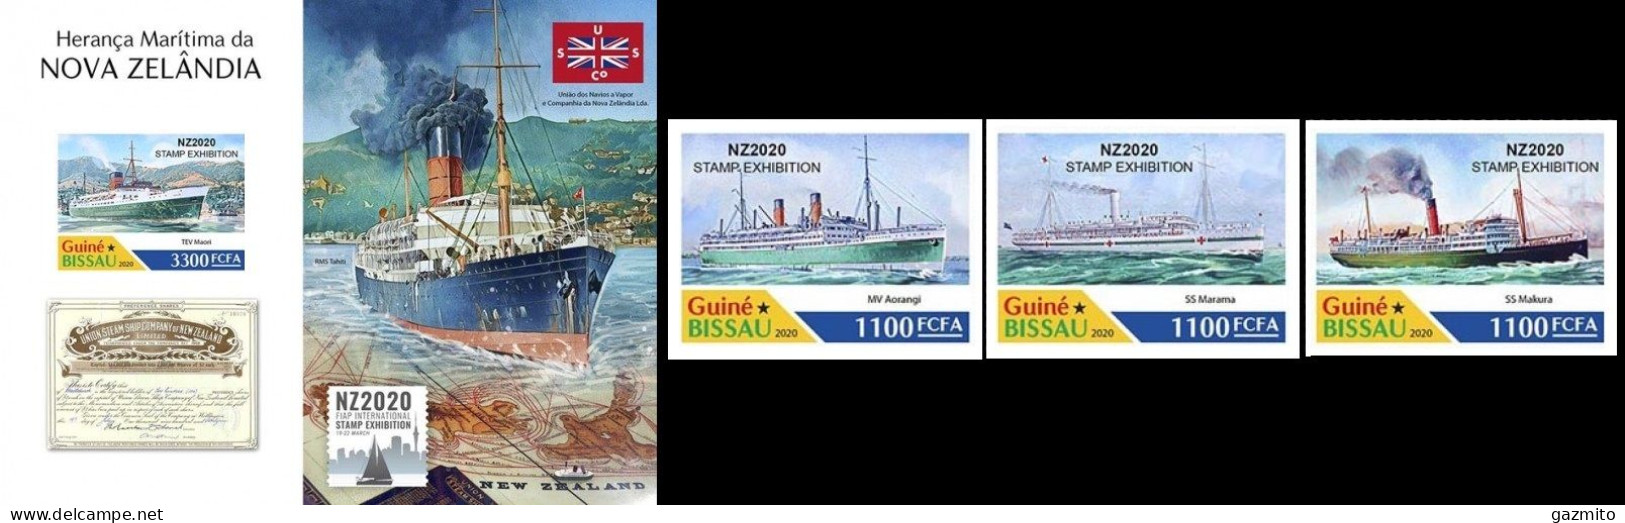 Guinea Bissau 2020, Philaexpo, New Zeland, Ships, 3val +BF IMPERFORATED - Esposizioni Filateliche